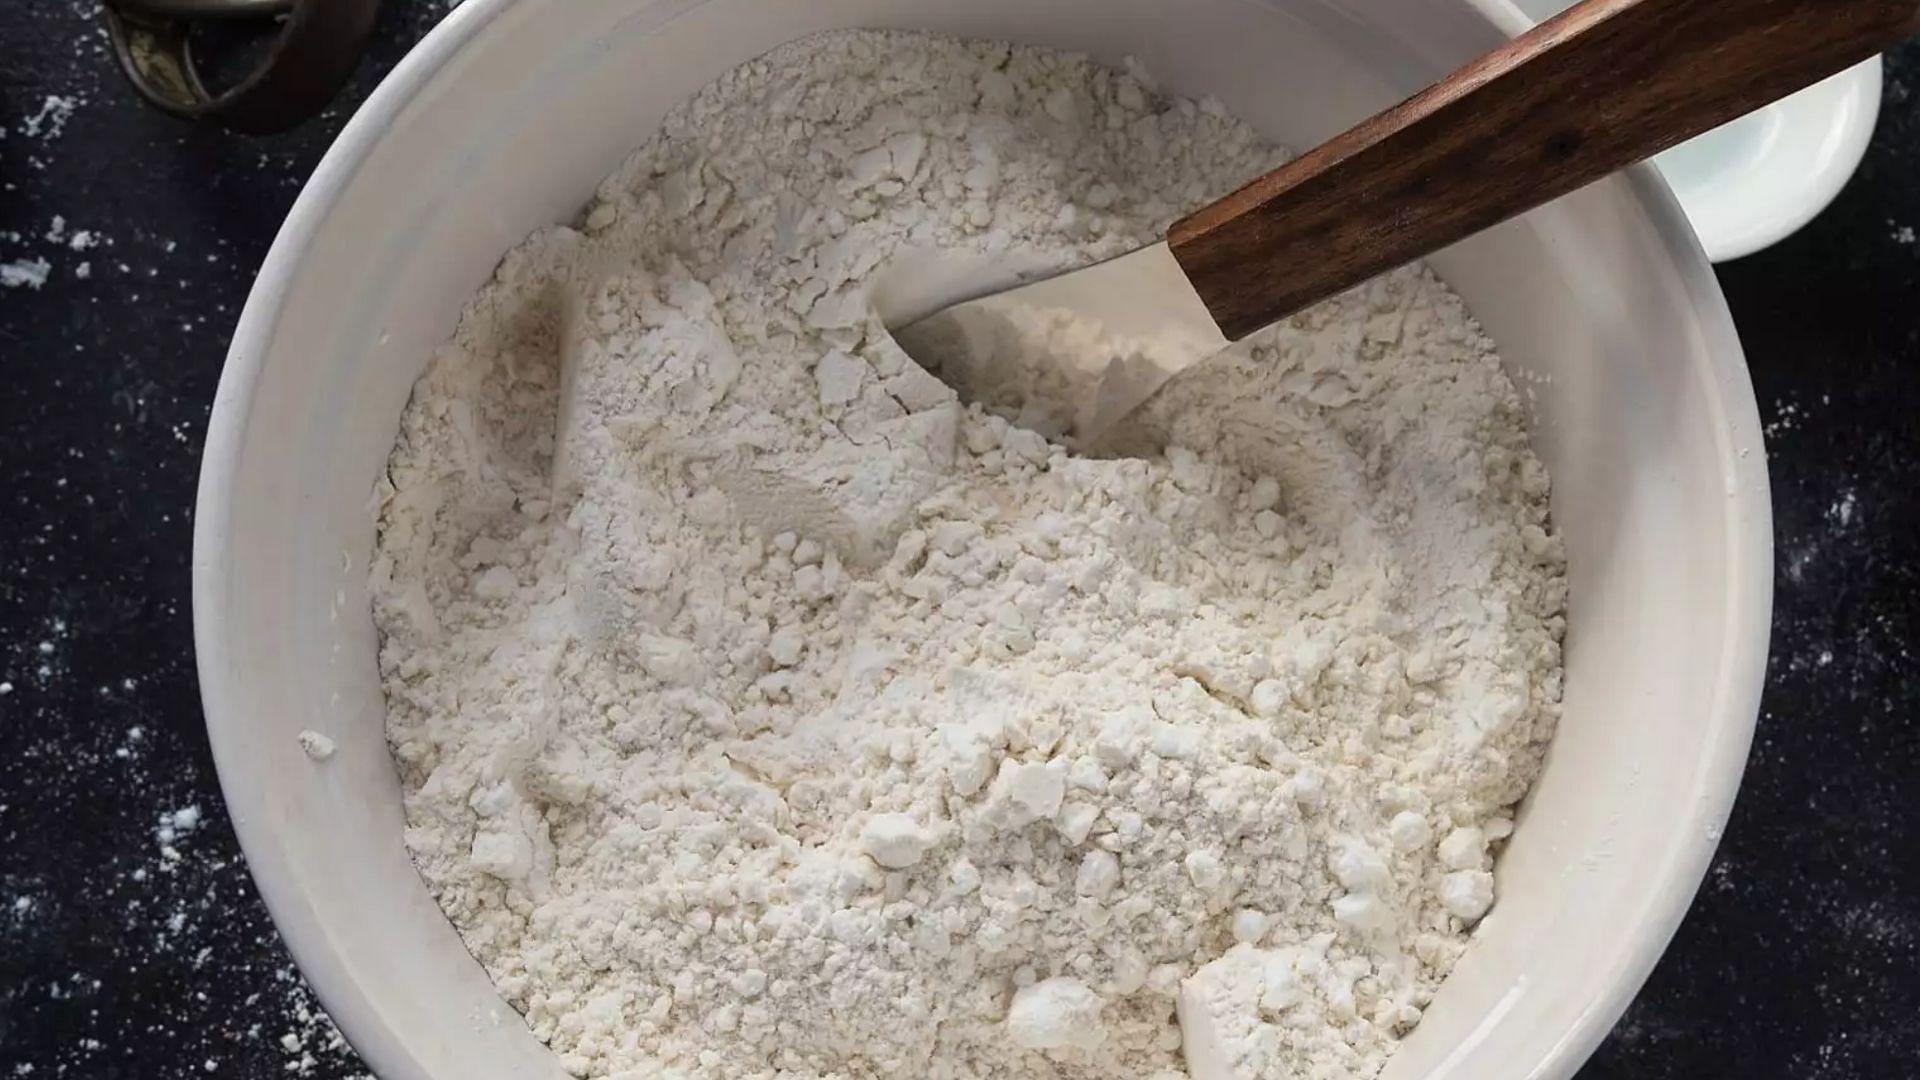 the Salmonella outbreak linked to raw and uncooked flour could have spread to states other than what has been reported (Image via Michelle Arnold / EyeEm/ Getty Images)